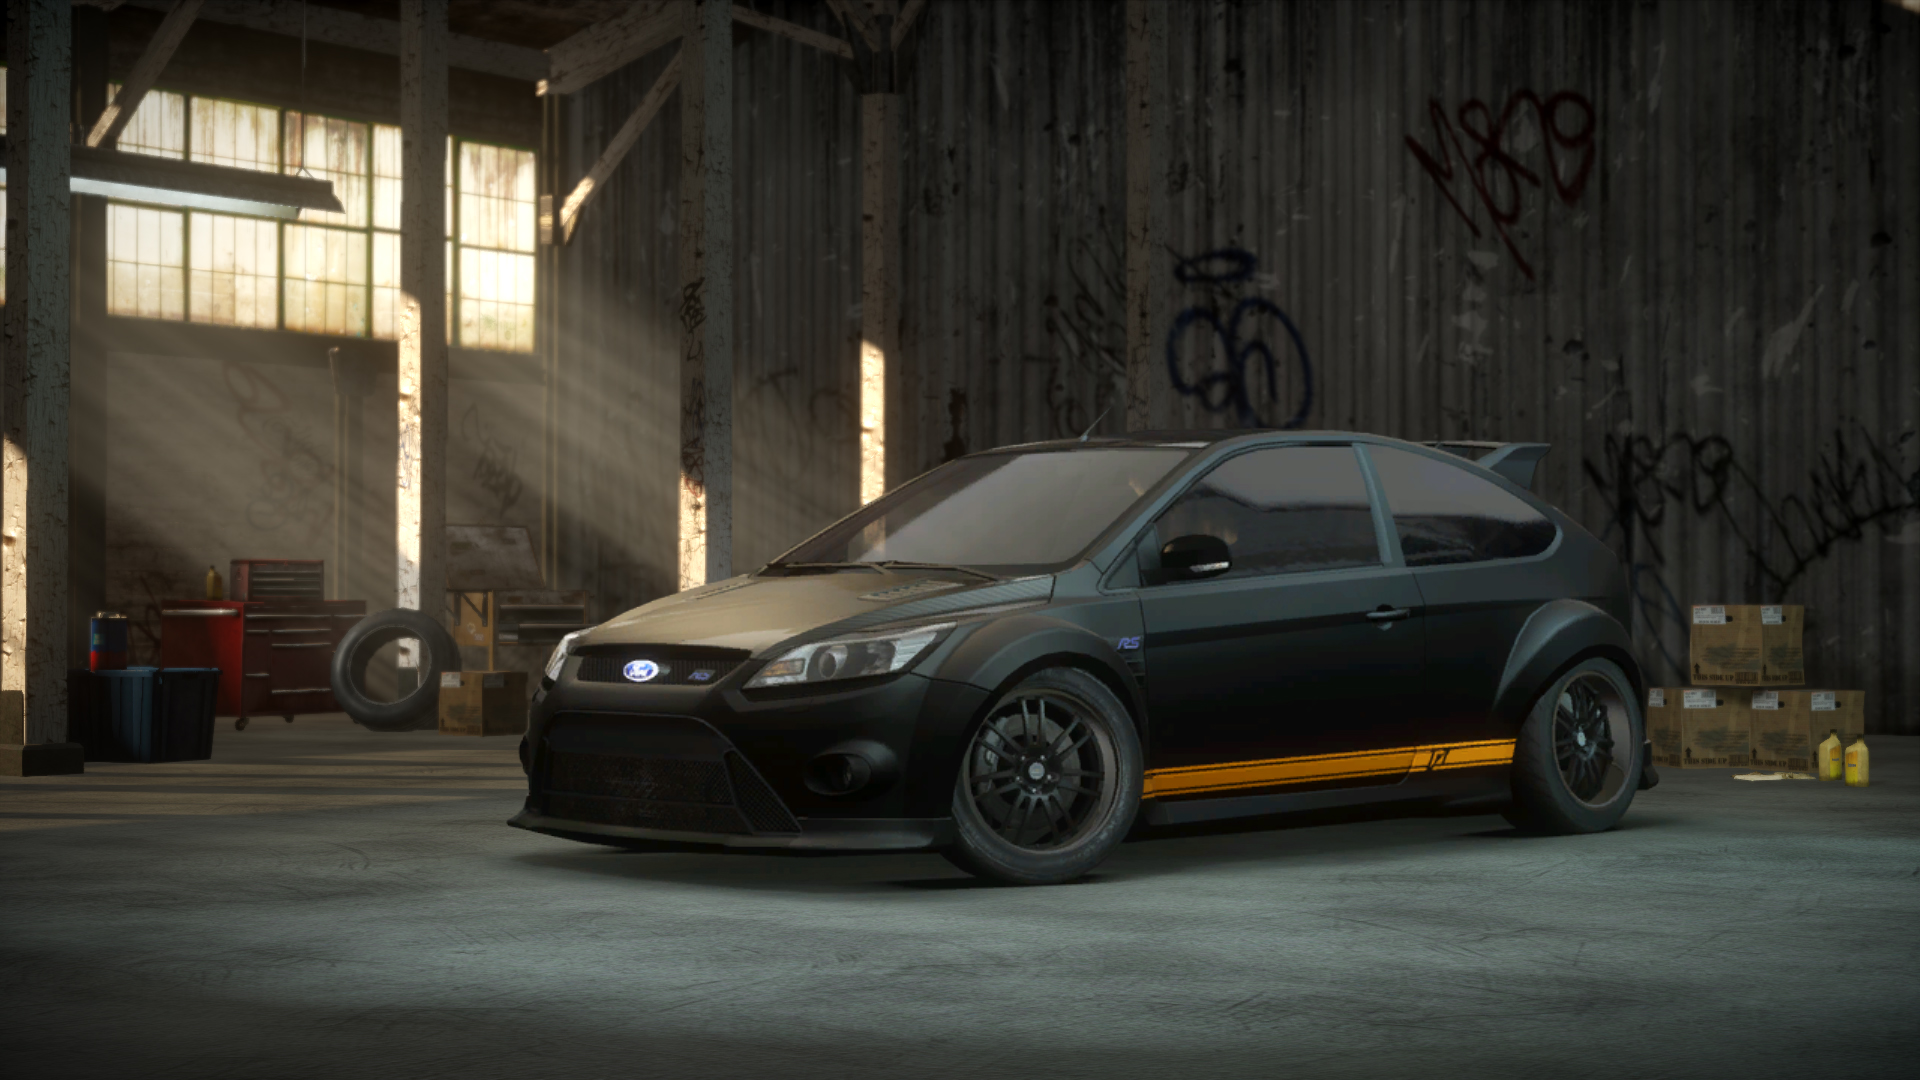 Ford Focus RS (Gen. 2), Need for Speed Wiki